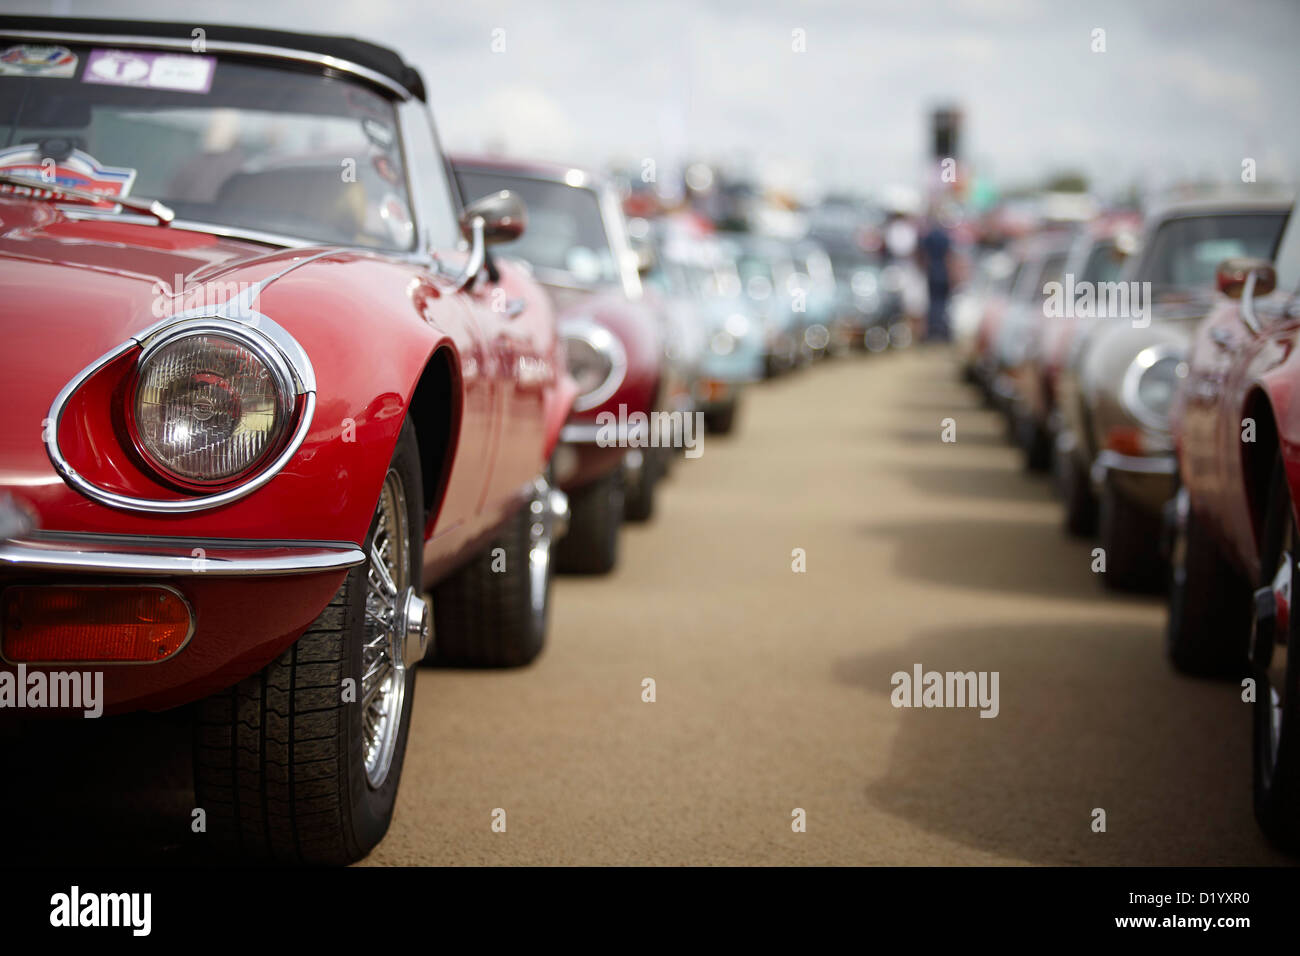 The Silverstone Classic car event Stock Photo